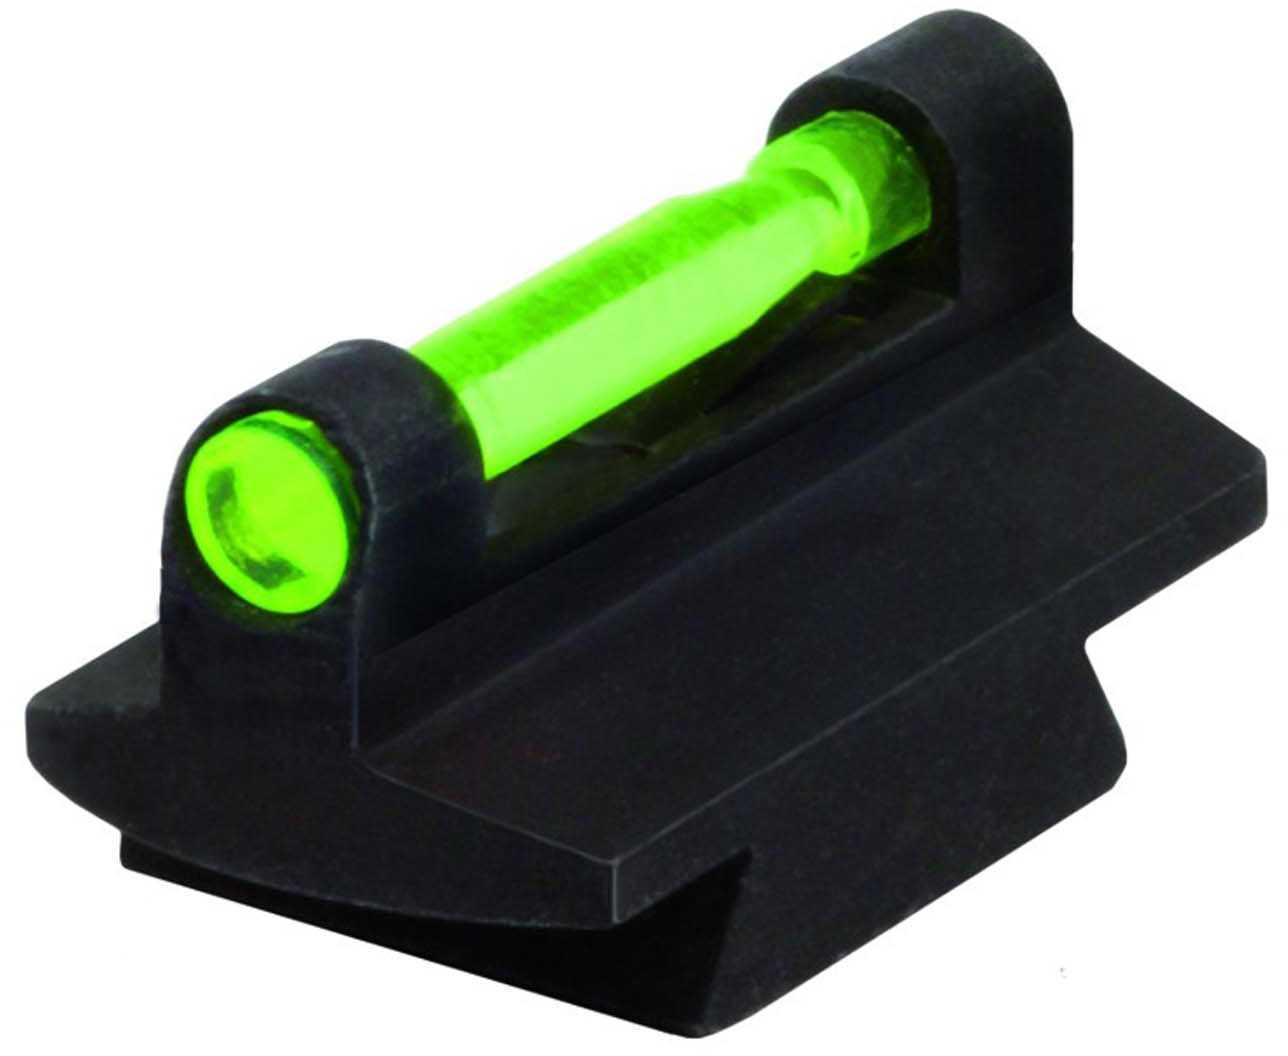 HIVIZ Rifle Front Sight For 3/8" Dovetail .315"